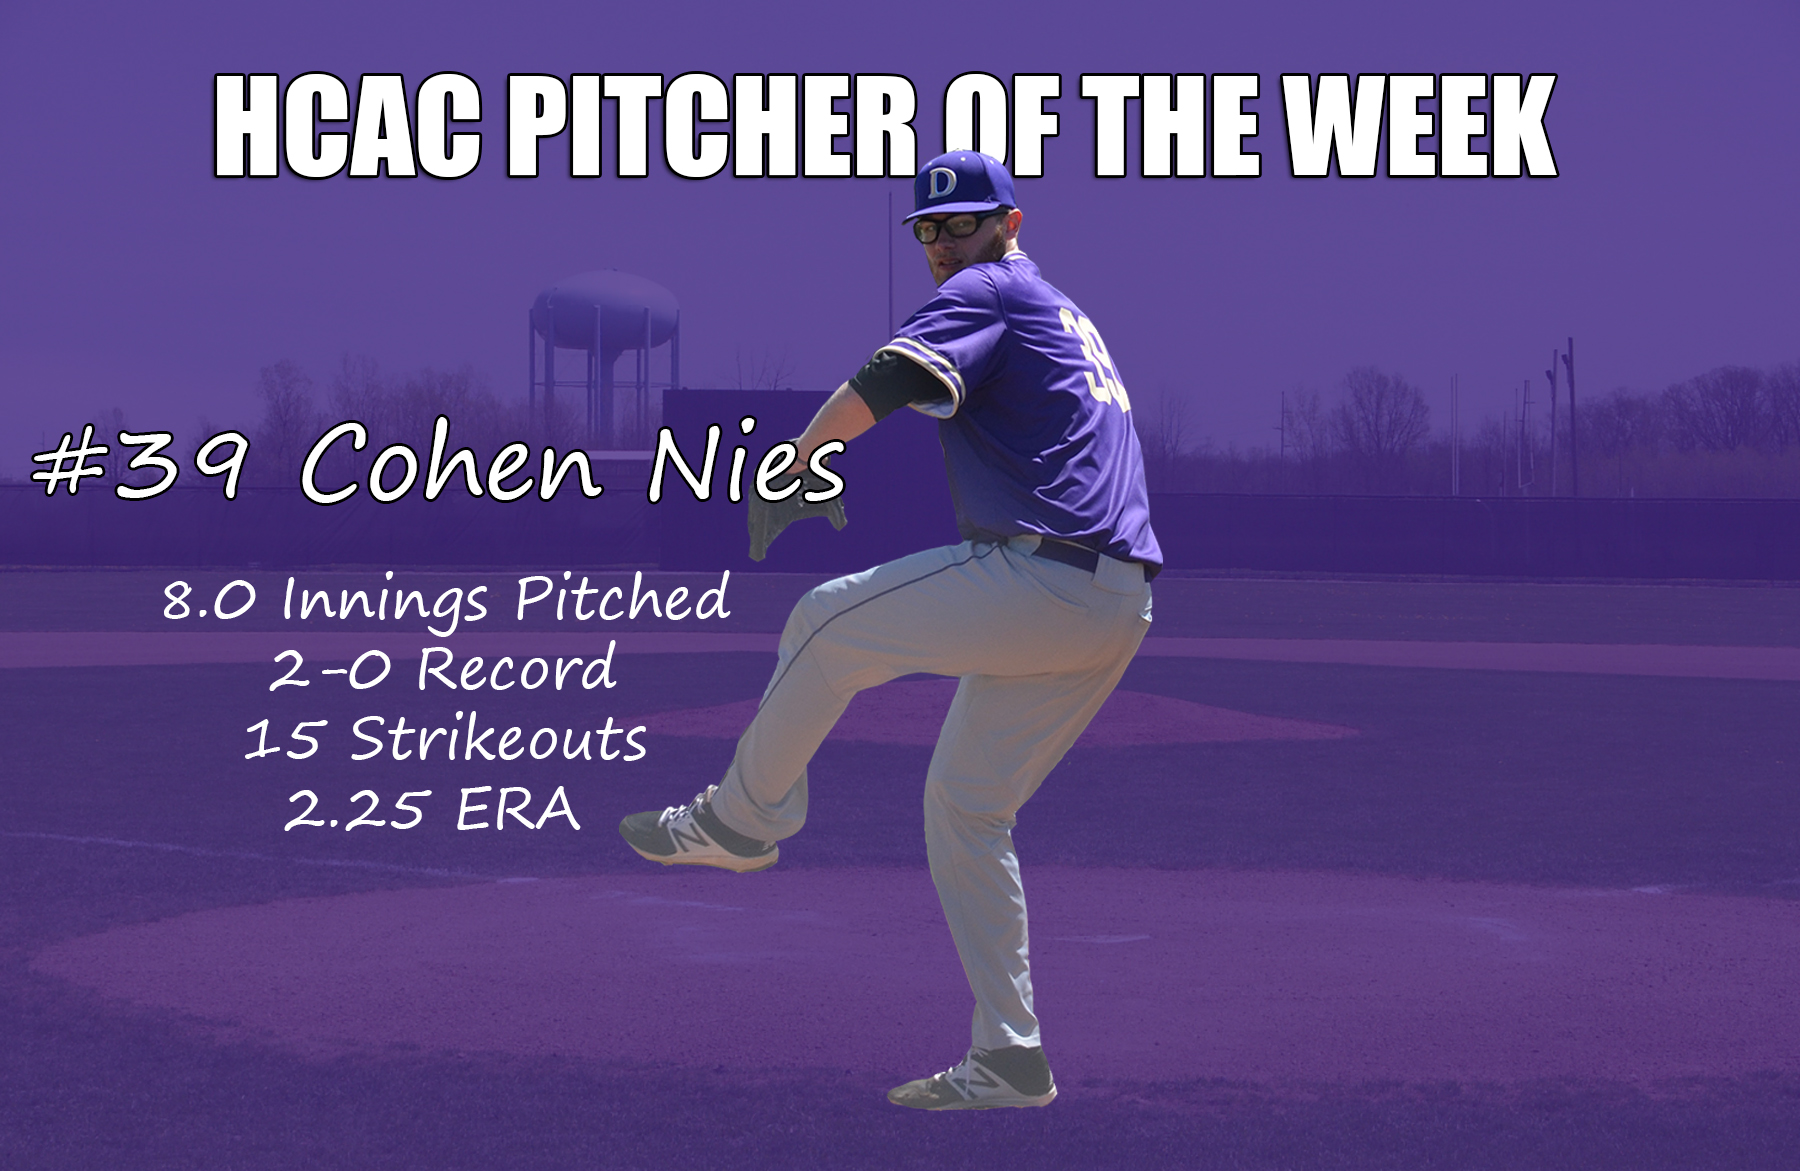 Nies Named HCAC Pitcher of the Week